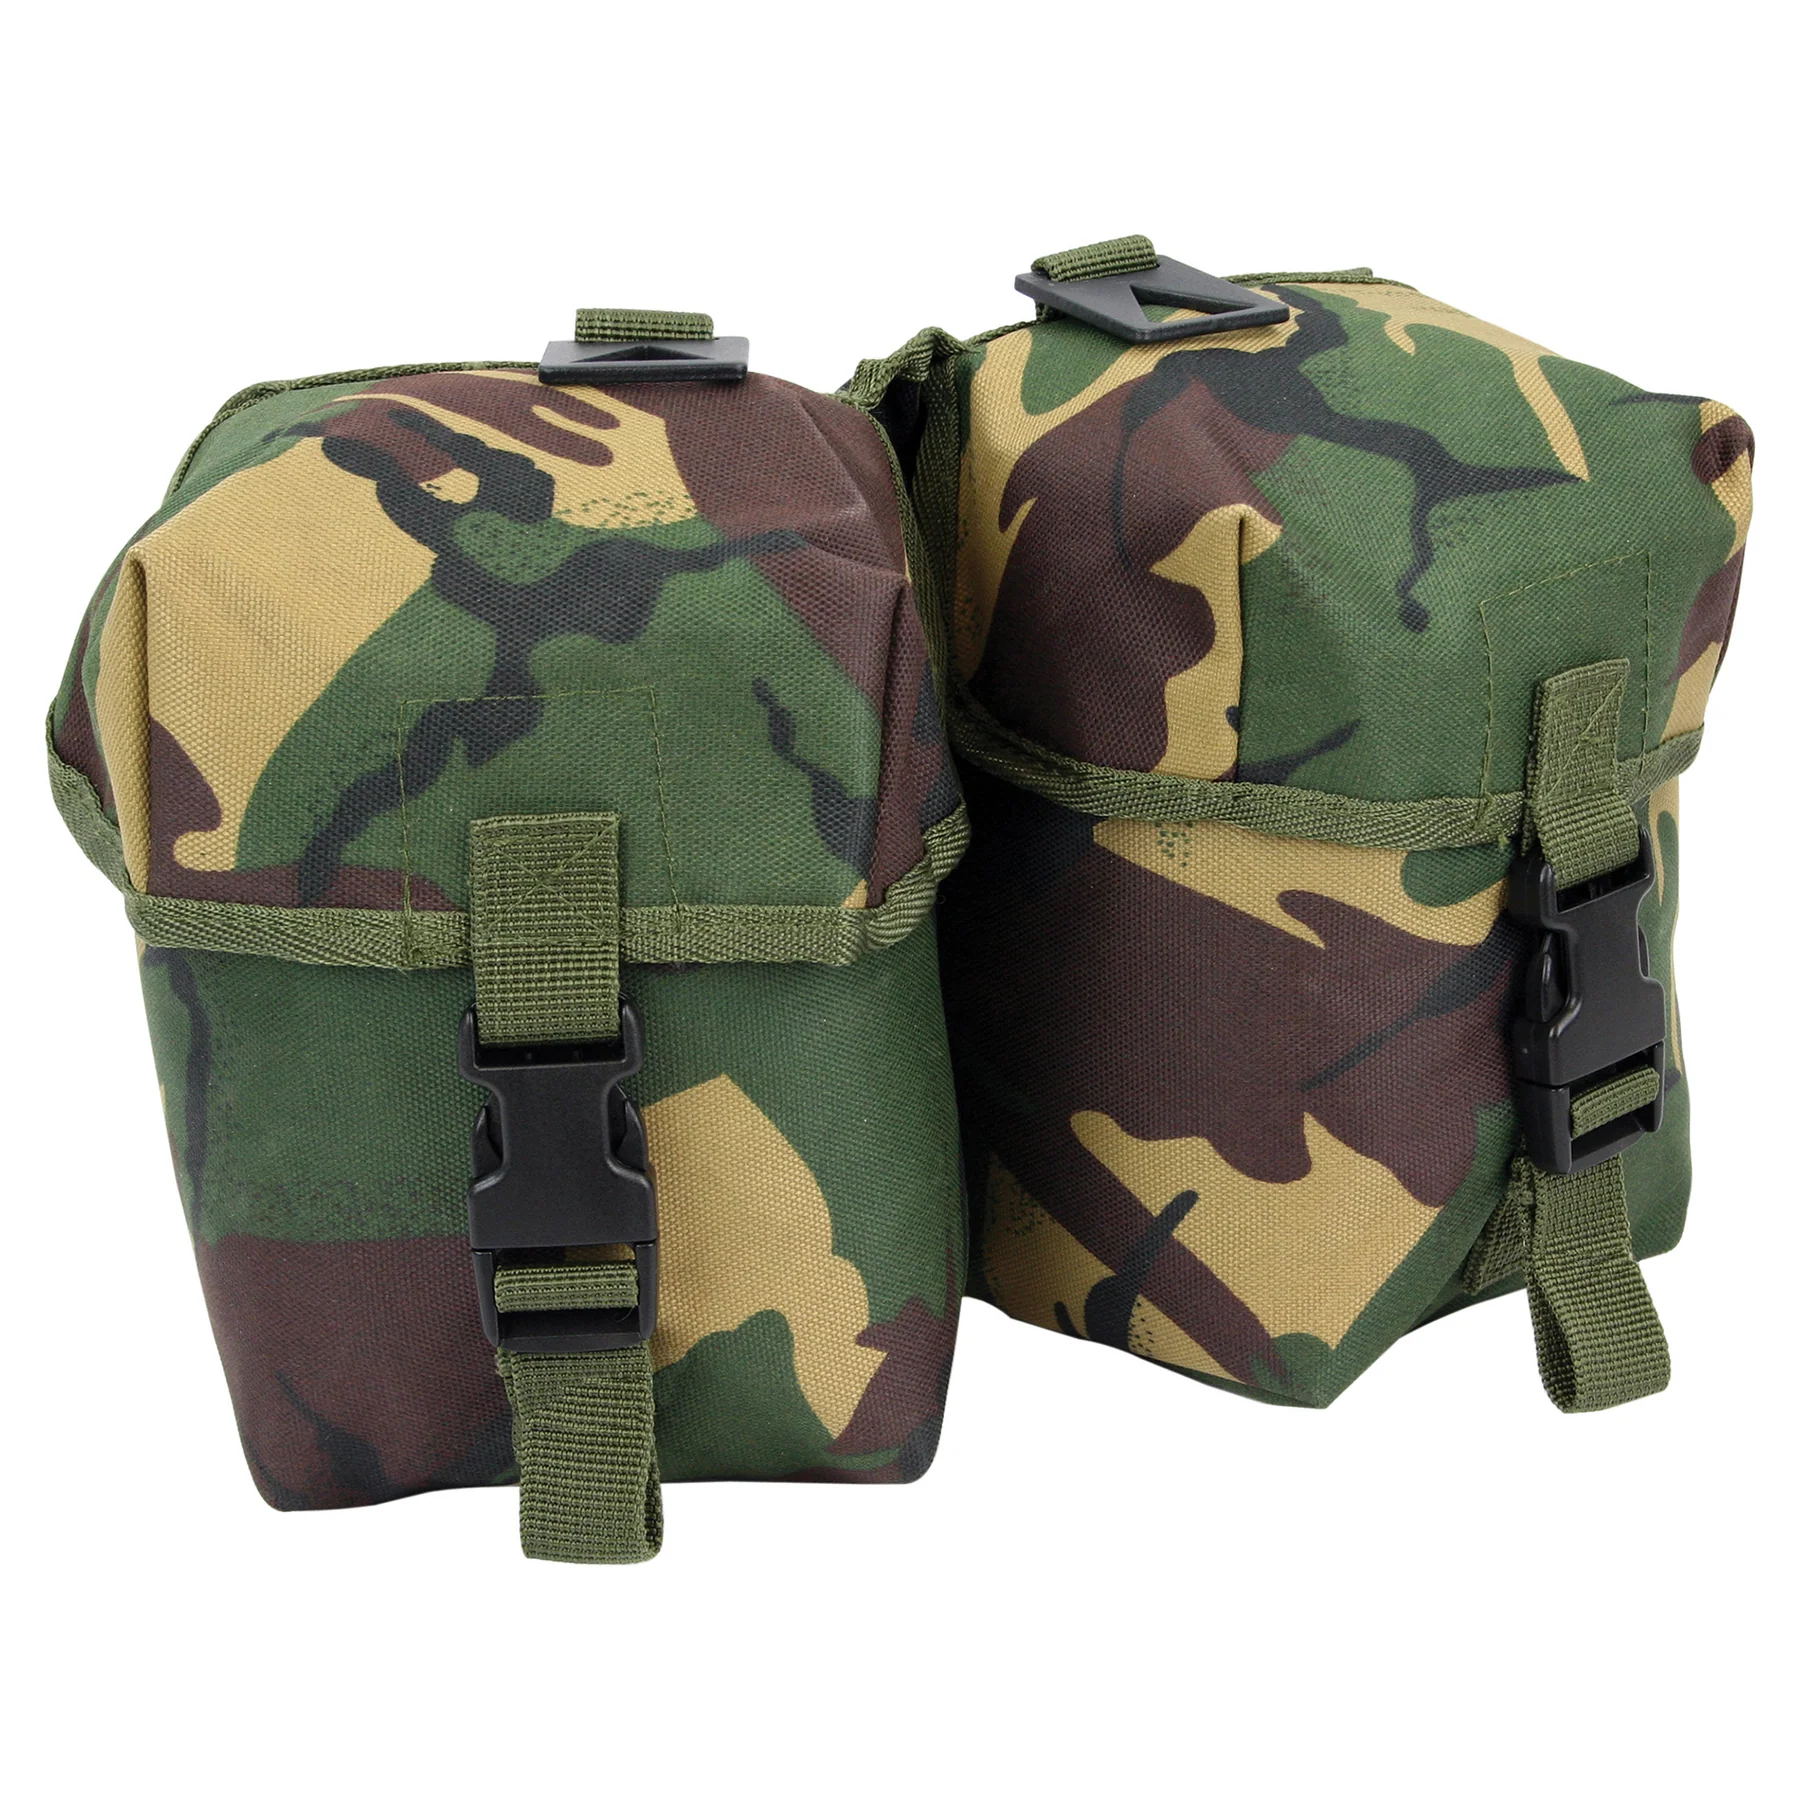 Hghlander Forces Woodland Double Pouch